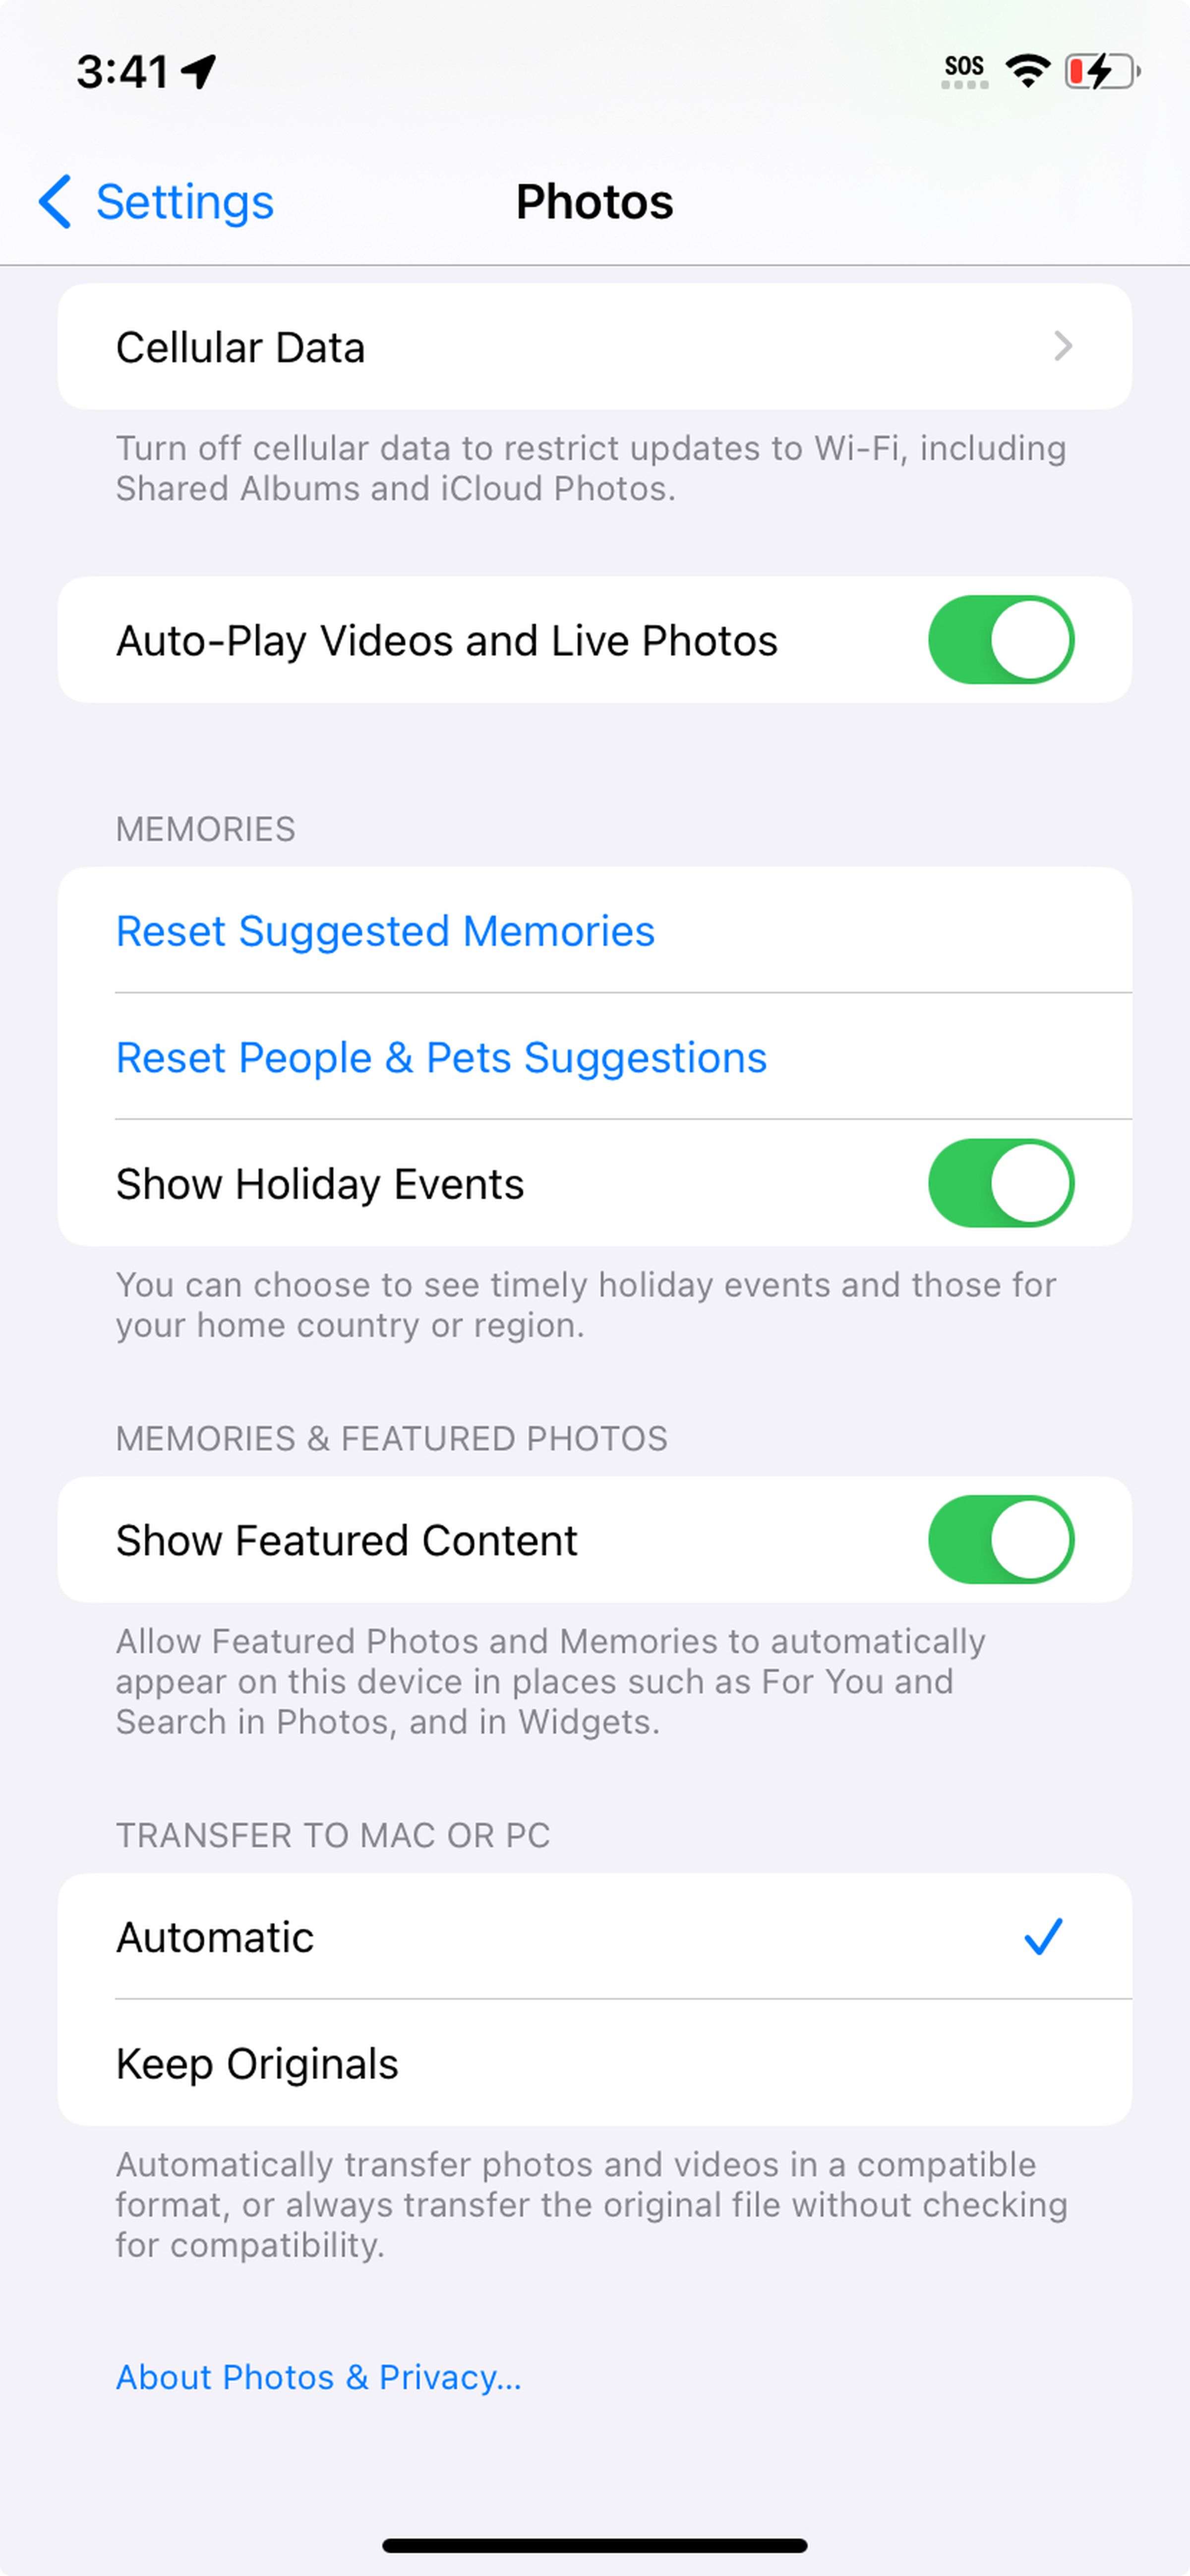 Photos settings page with a list of options, including Show Holiday Events.